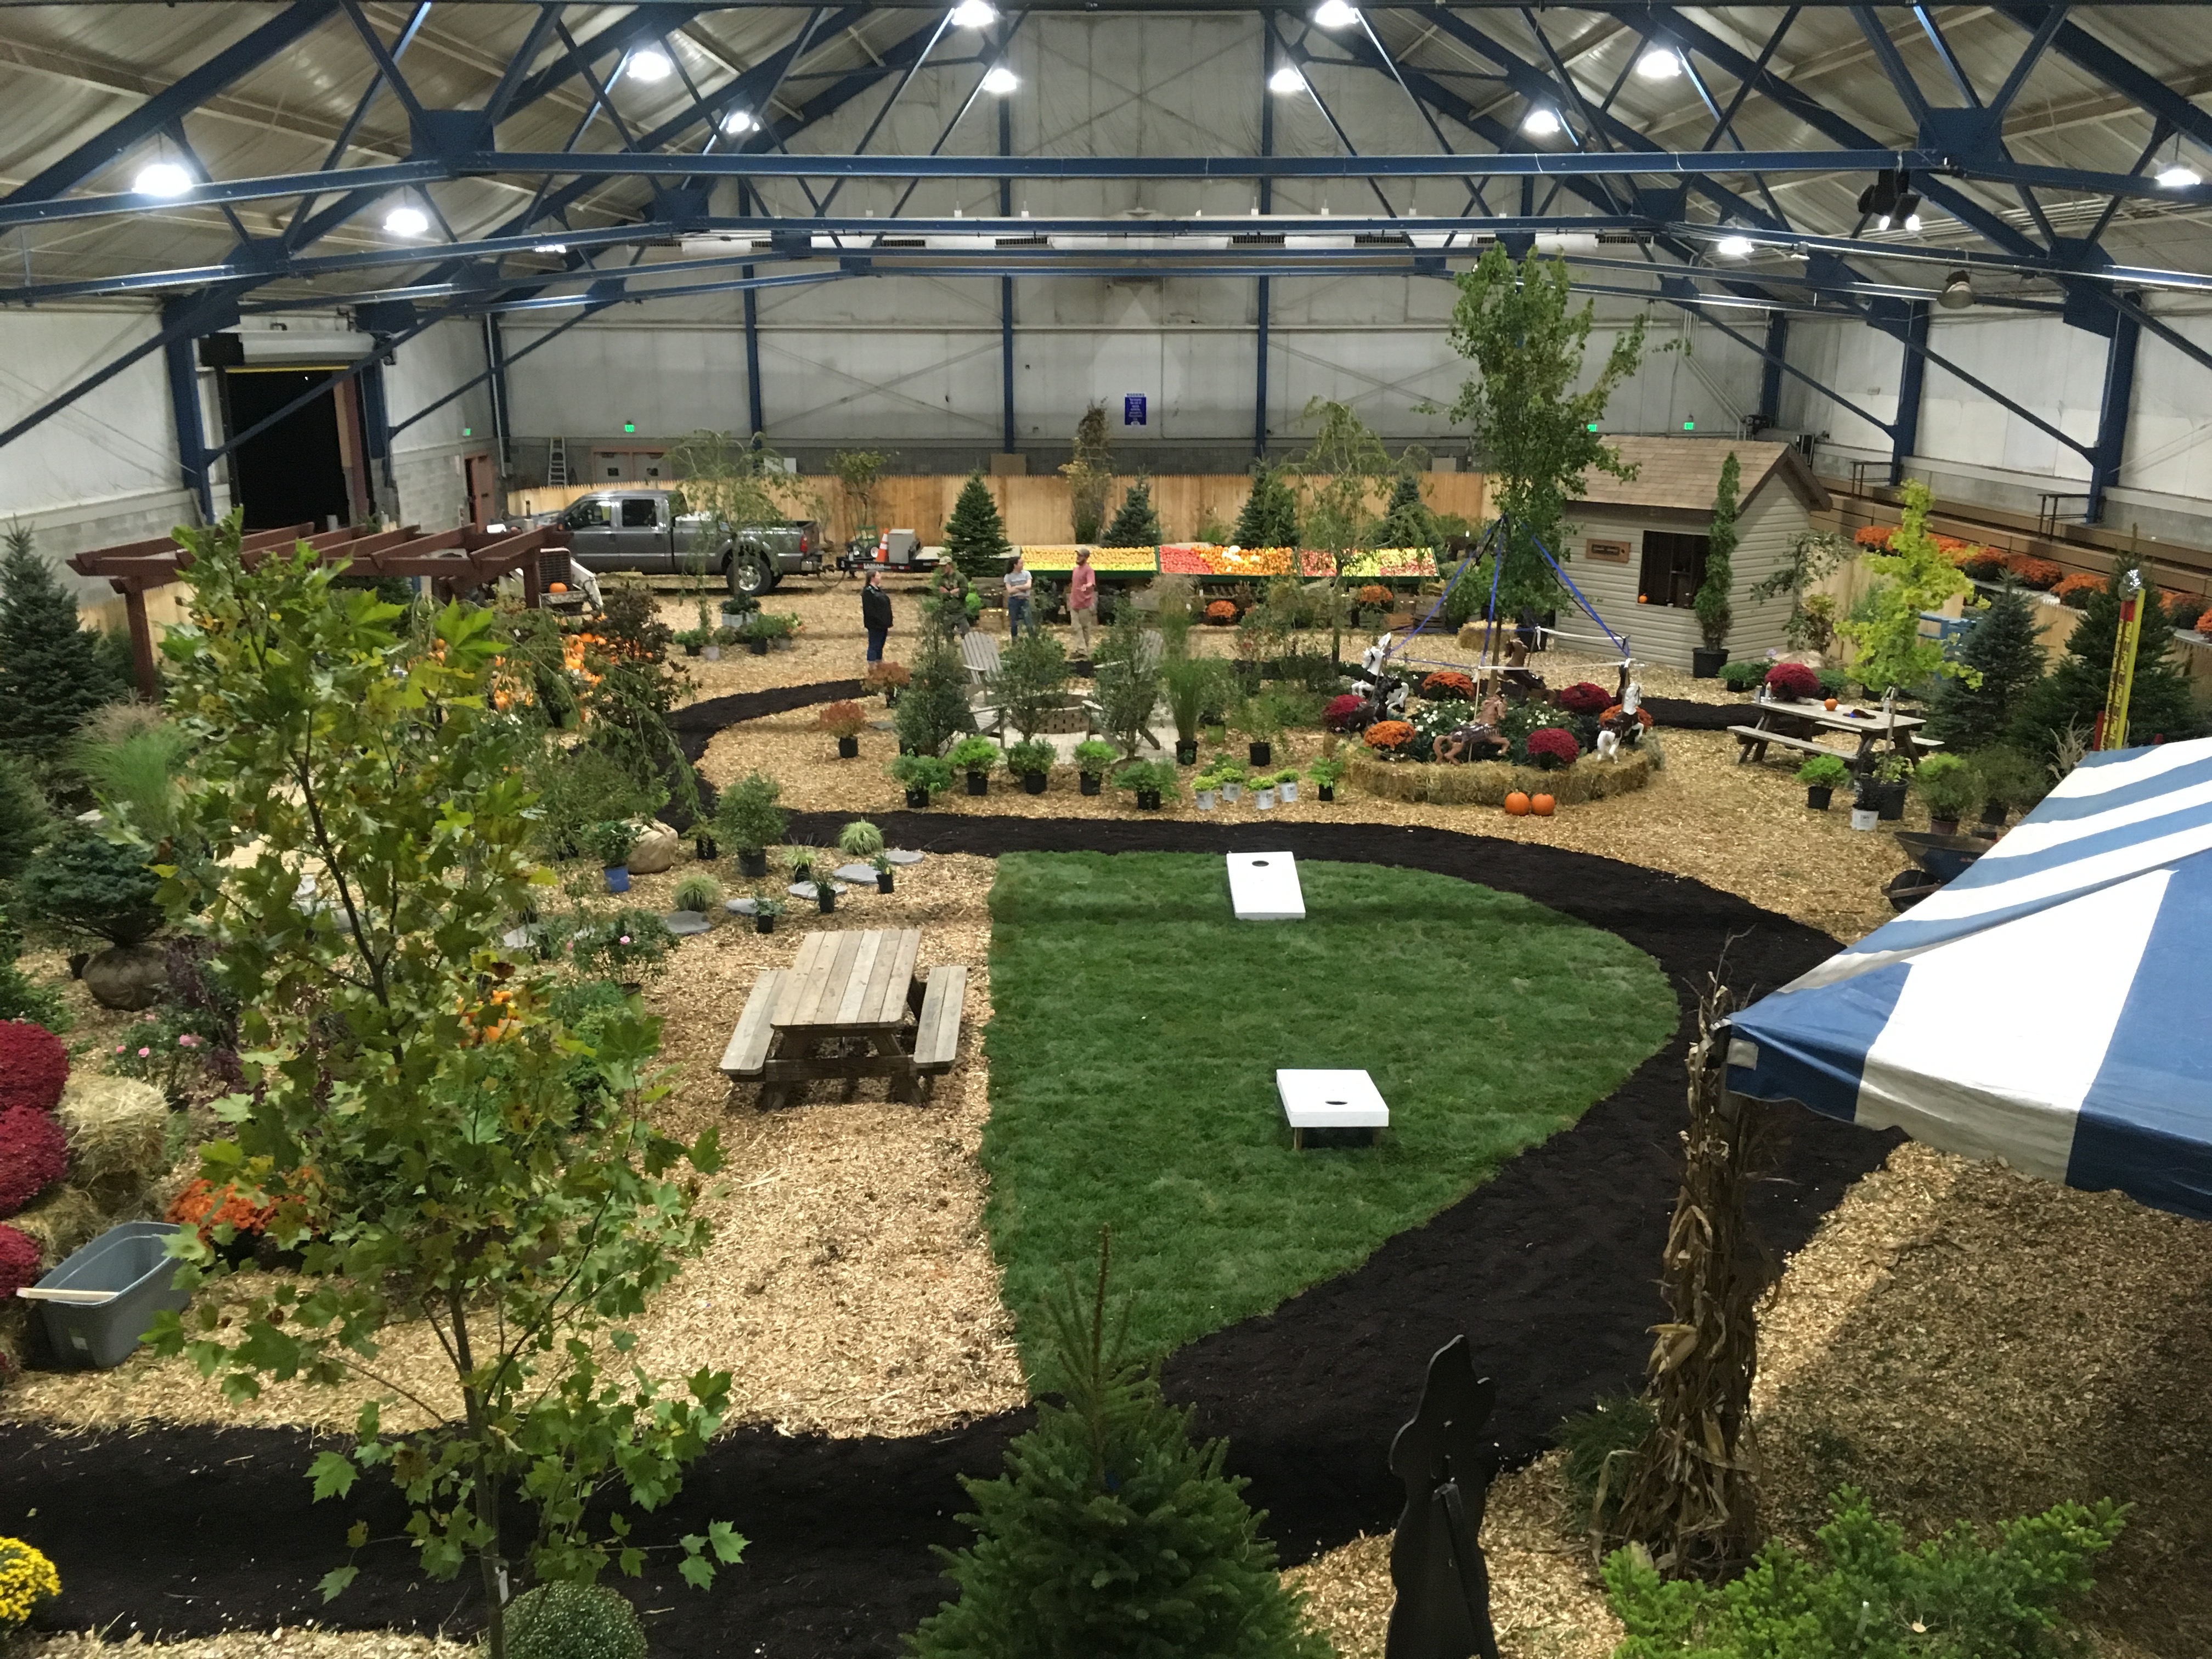 Annual Penn State Horticulture Show Slated For Oct 23 24 At University Park Penn State University